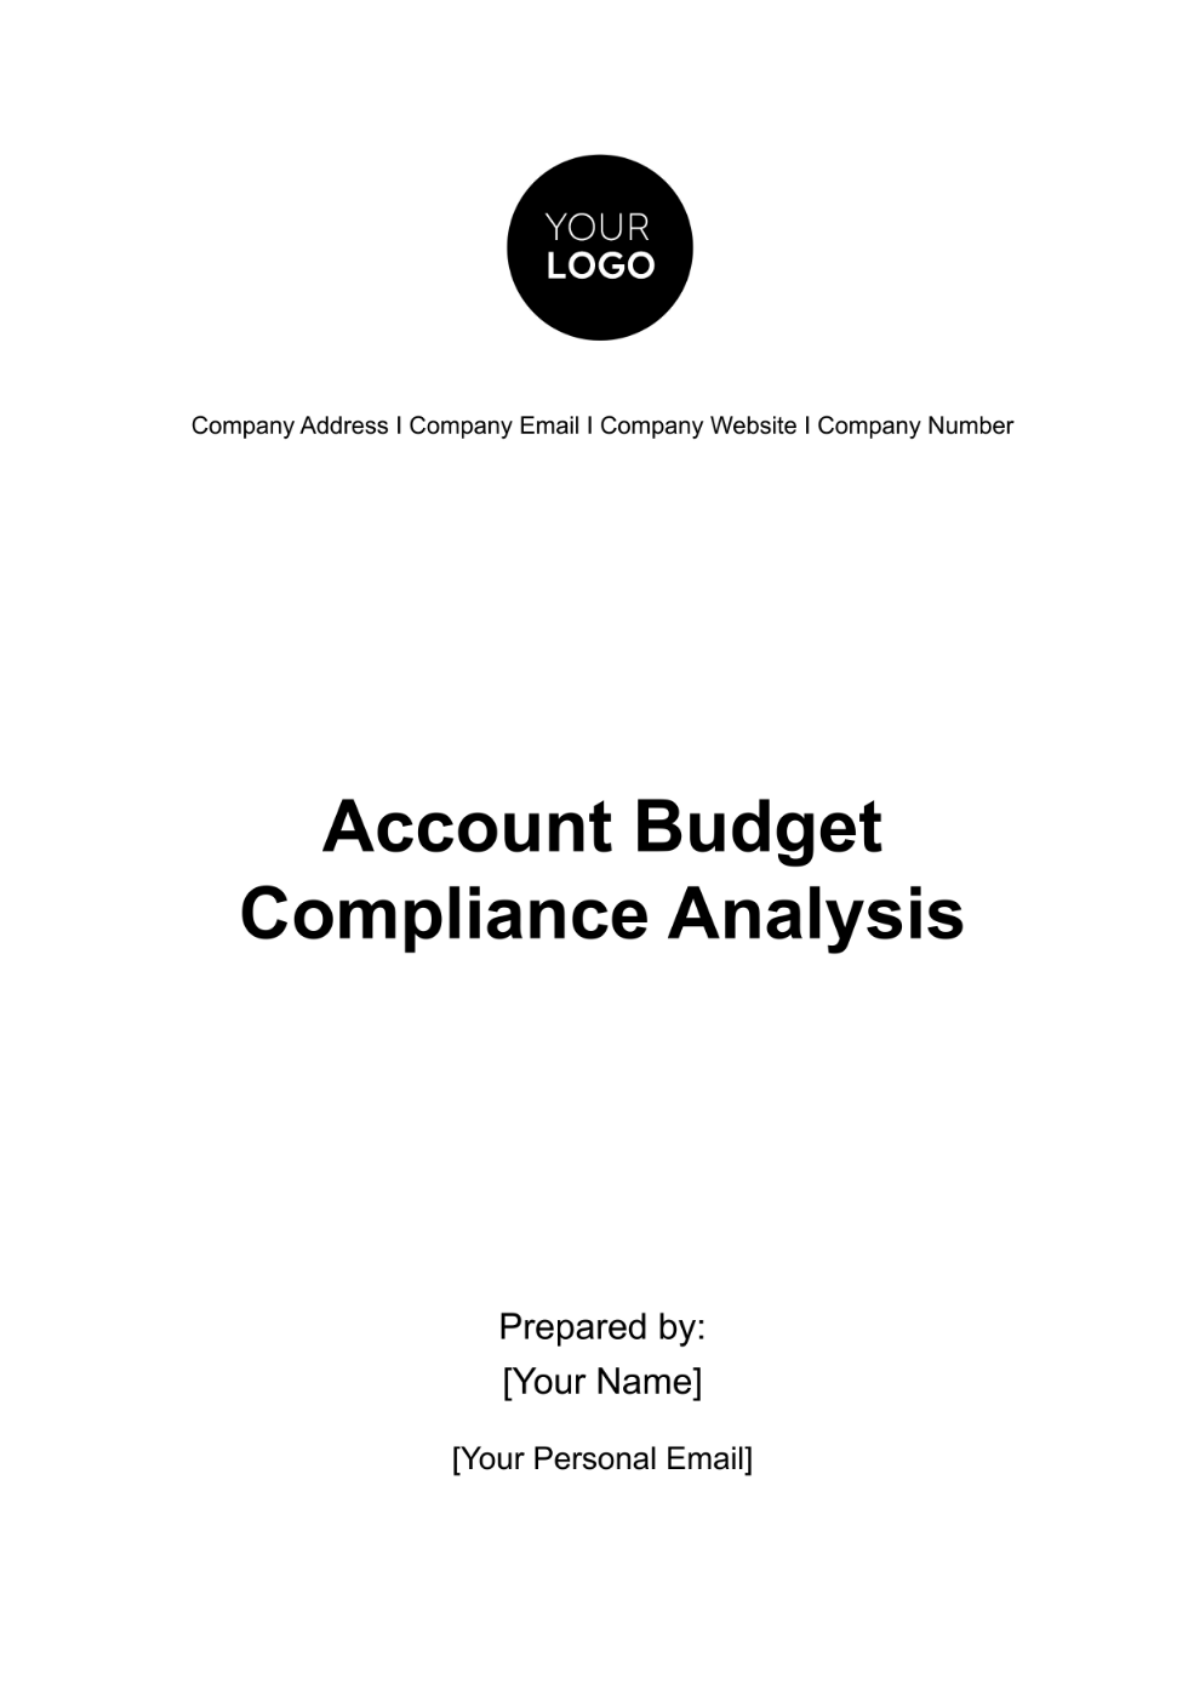 Account Budget Compliance Analysis Template